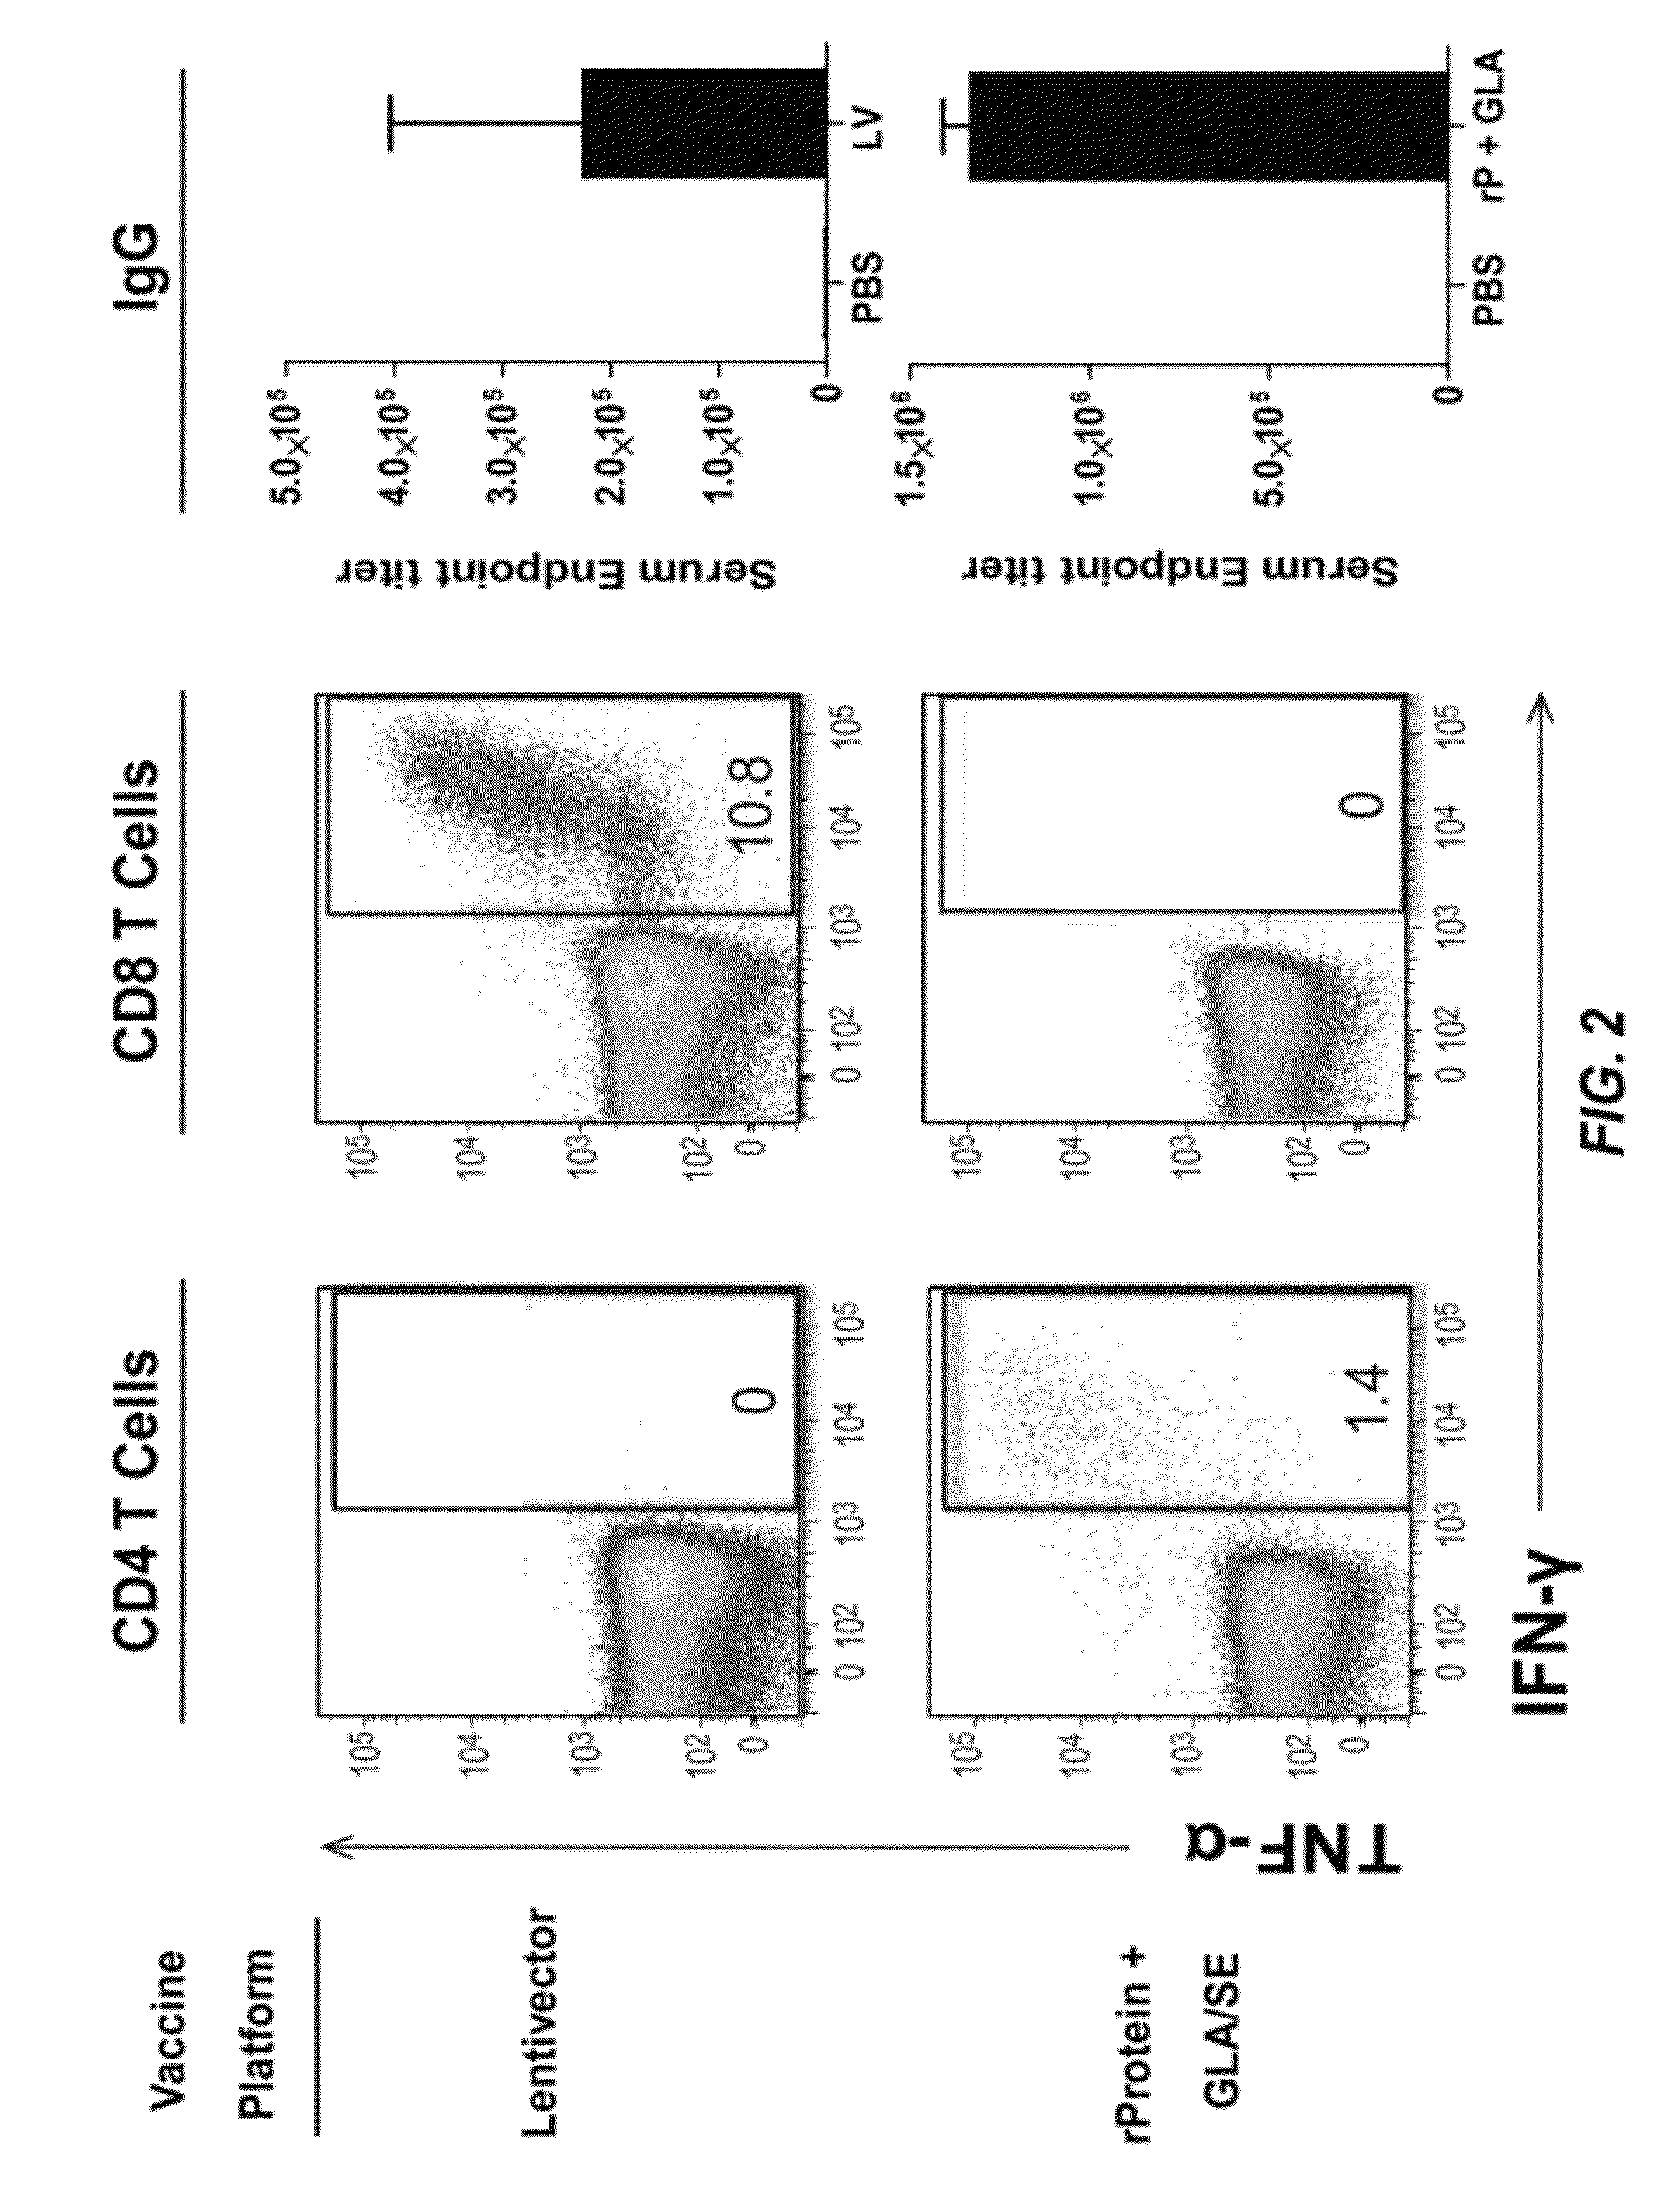 Immunogenic compositions and methods of using the compositions for inducing humoral and cellular immune responses